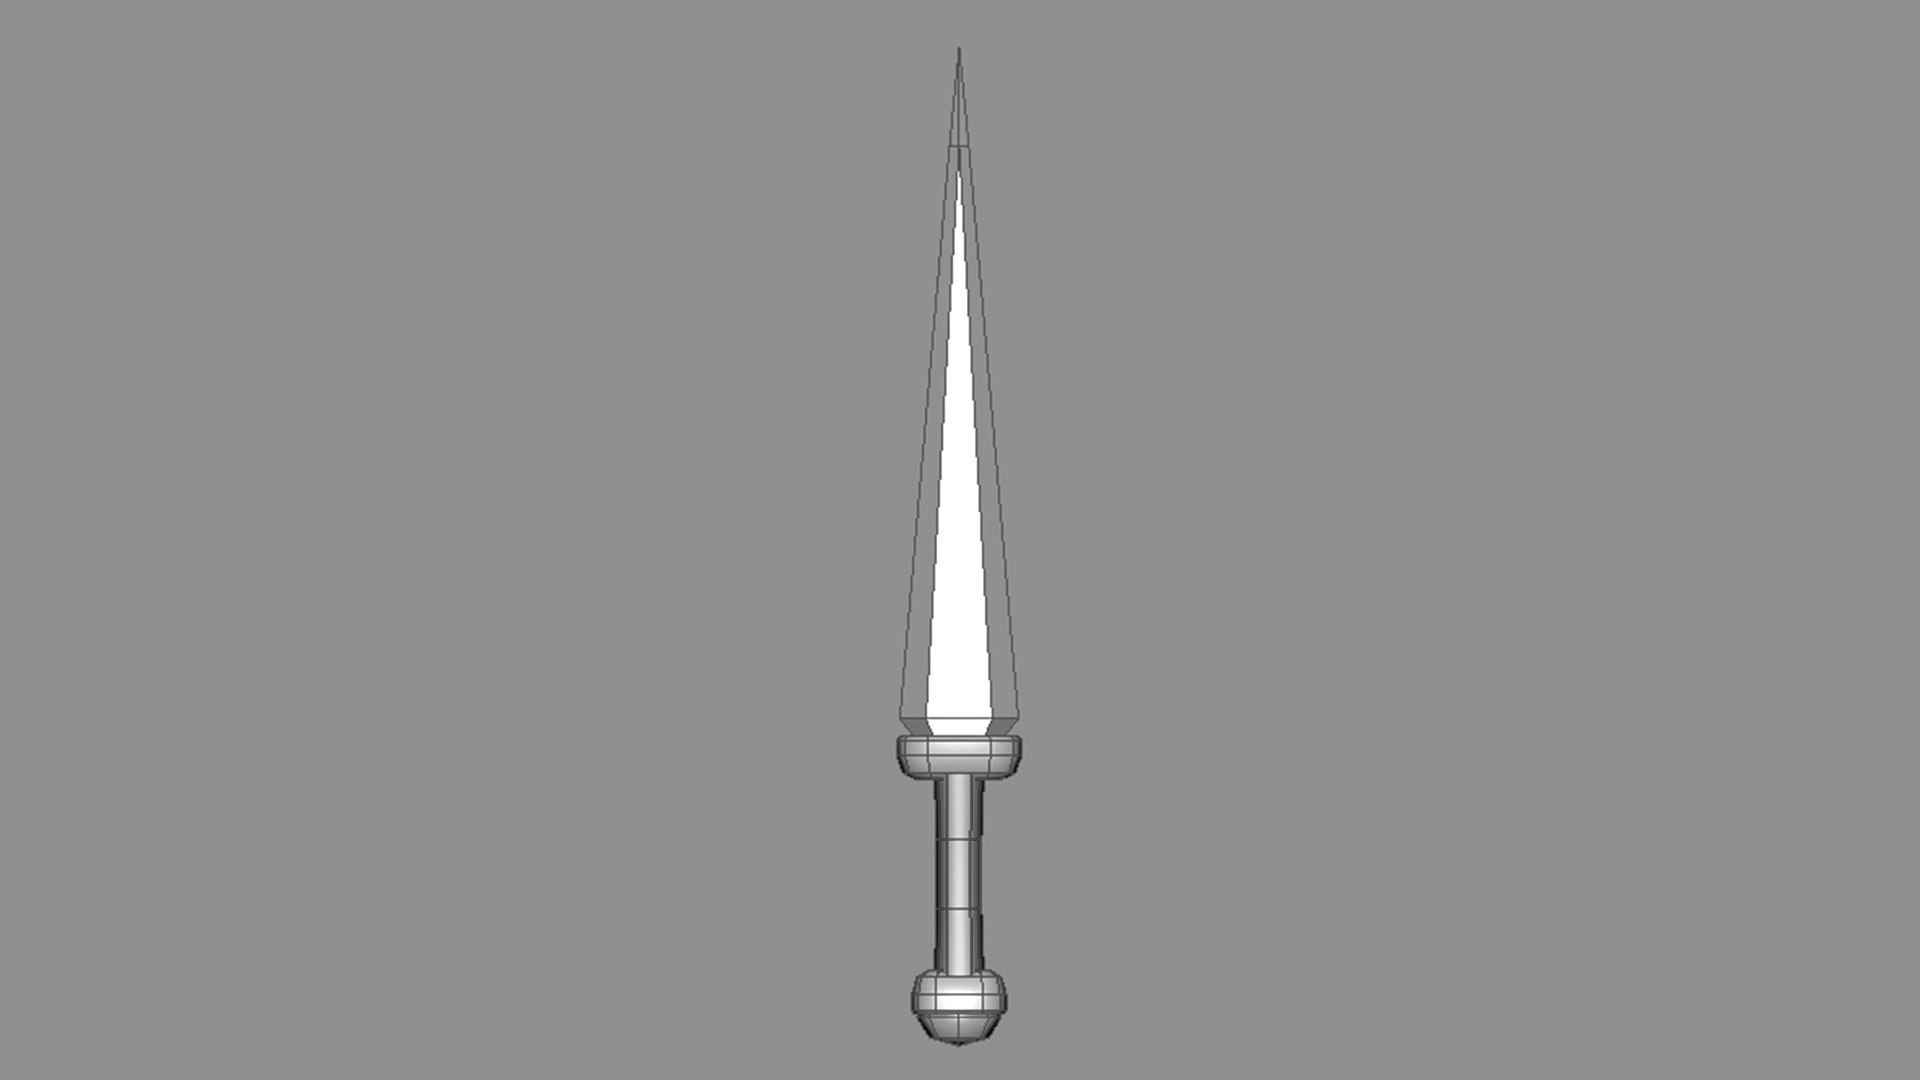 Game Ready Low Poly Magical Dagger 3D model - TurboSquid 1851287